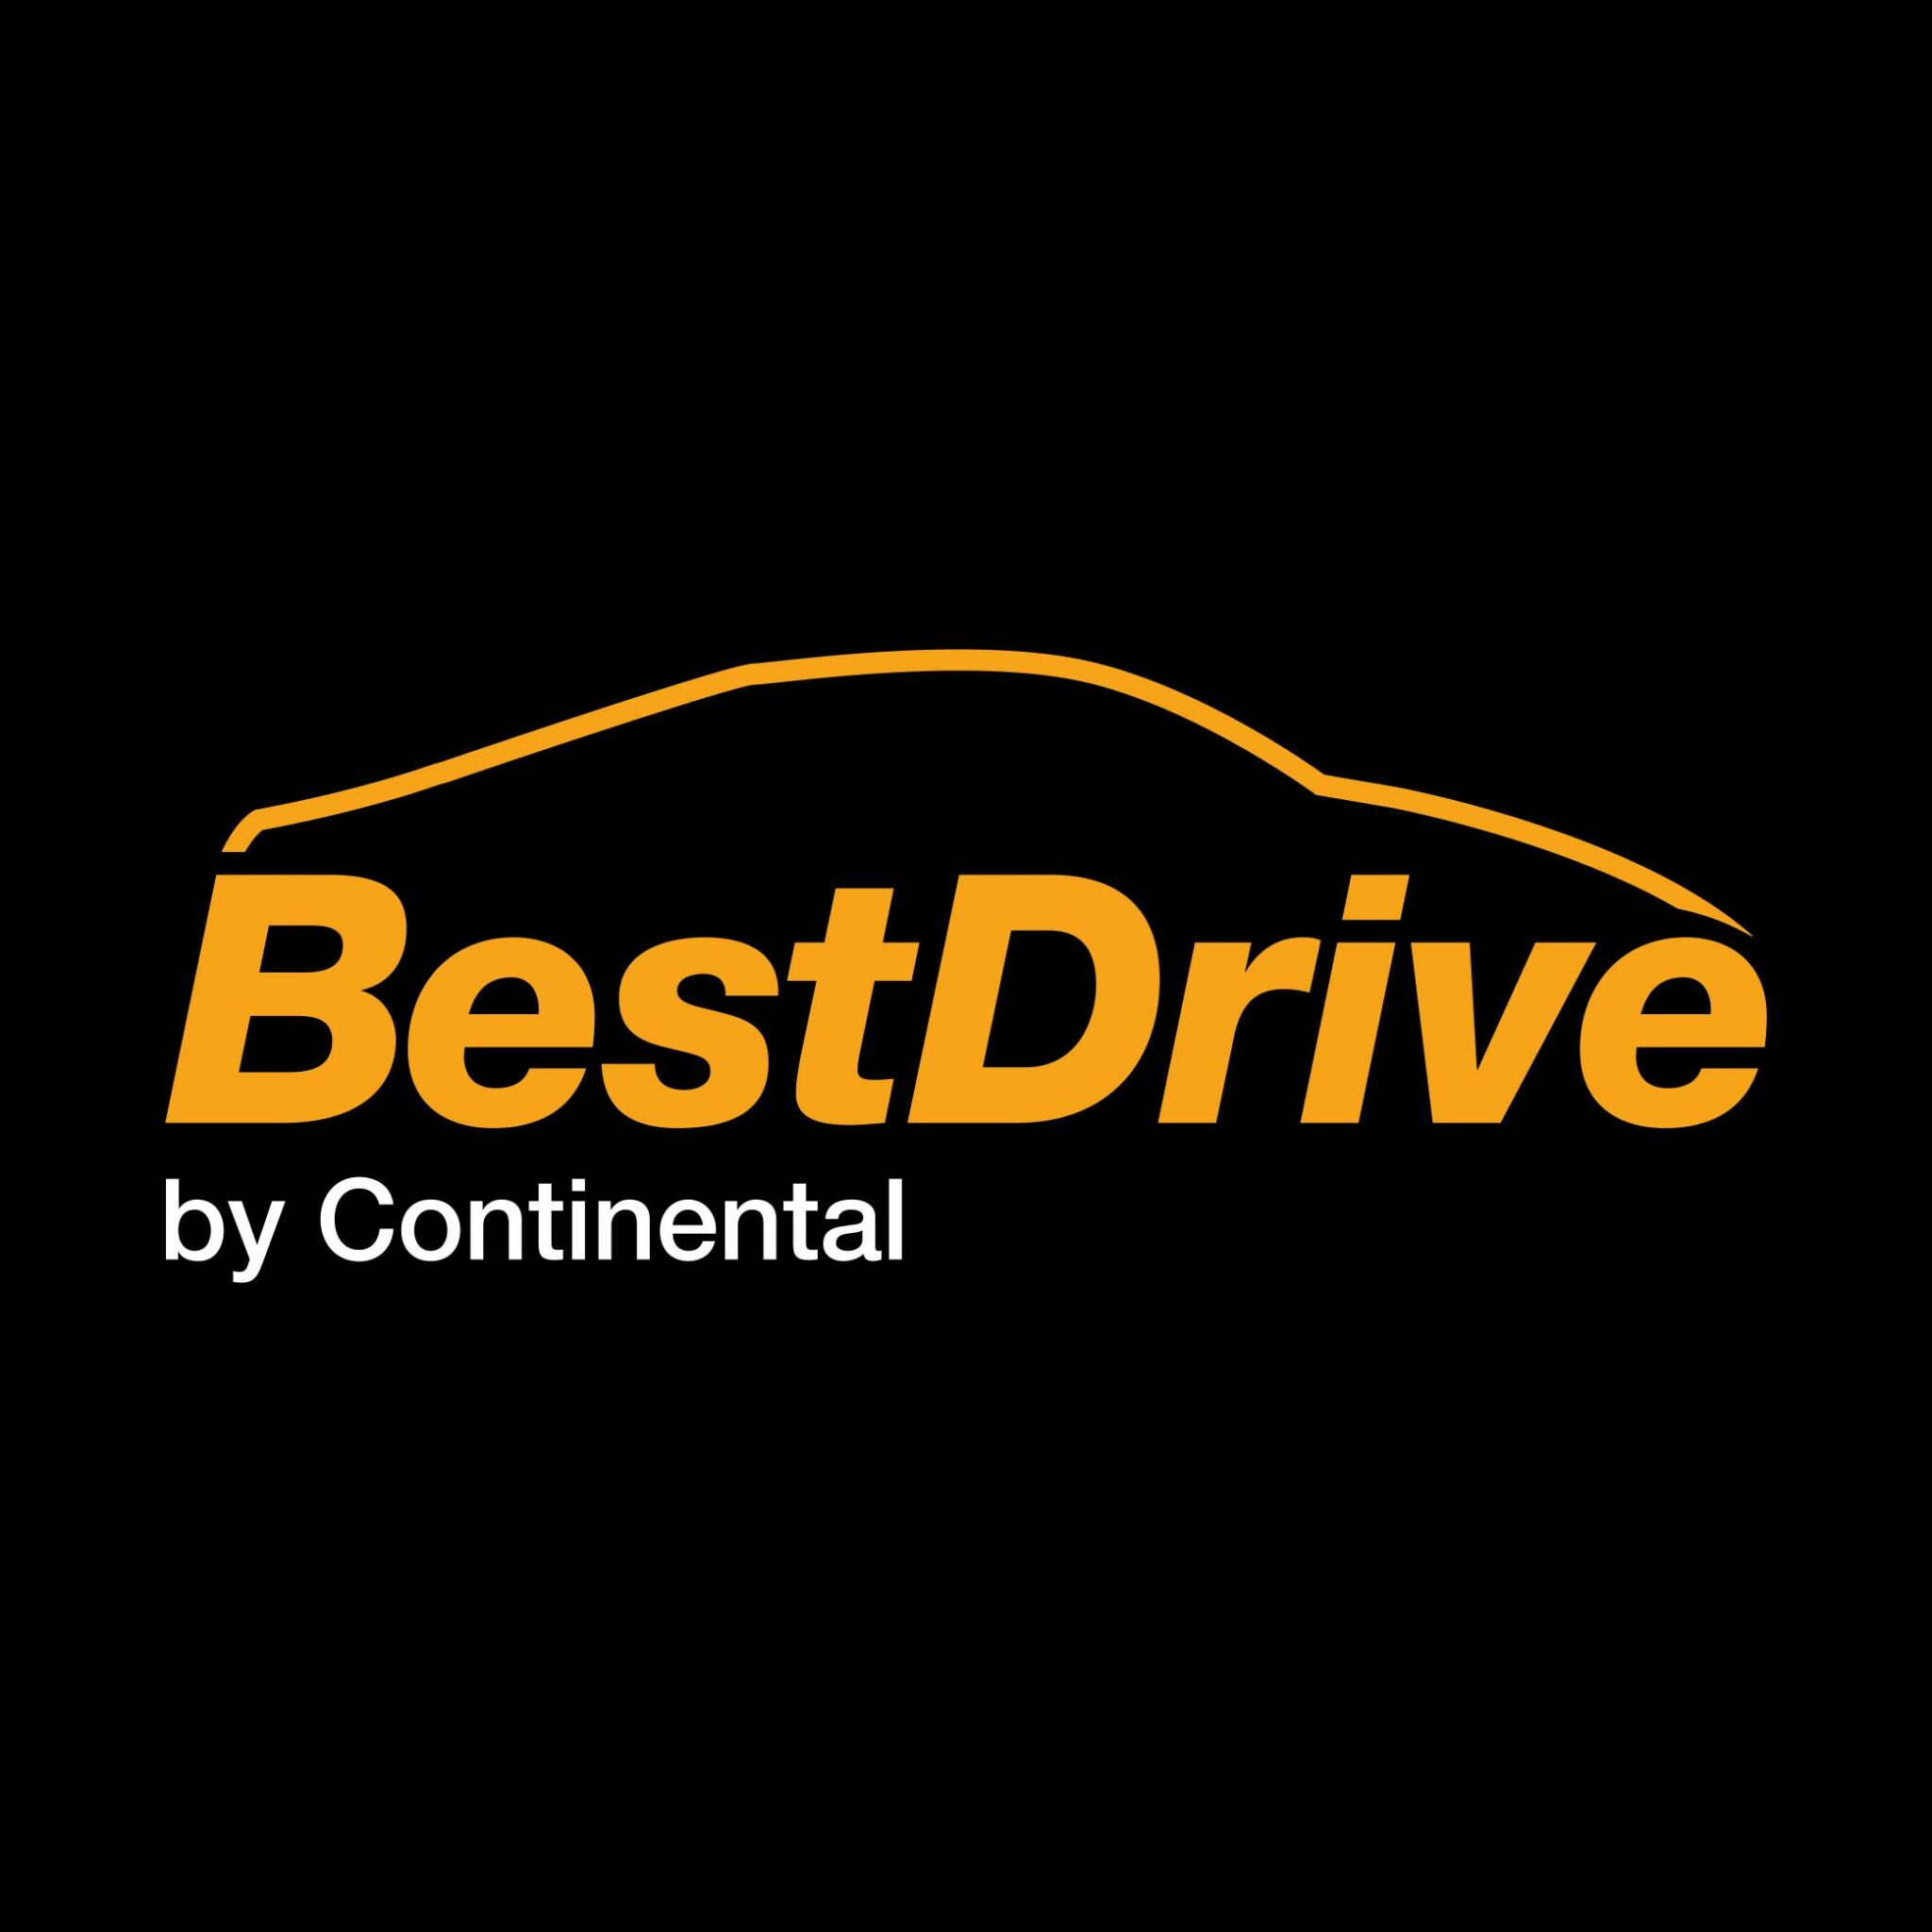 Best Drive by Continental